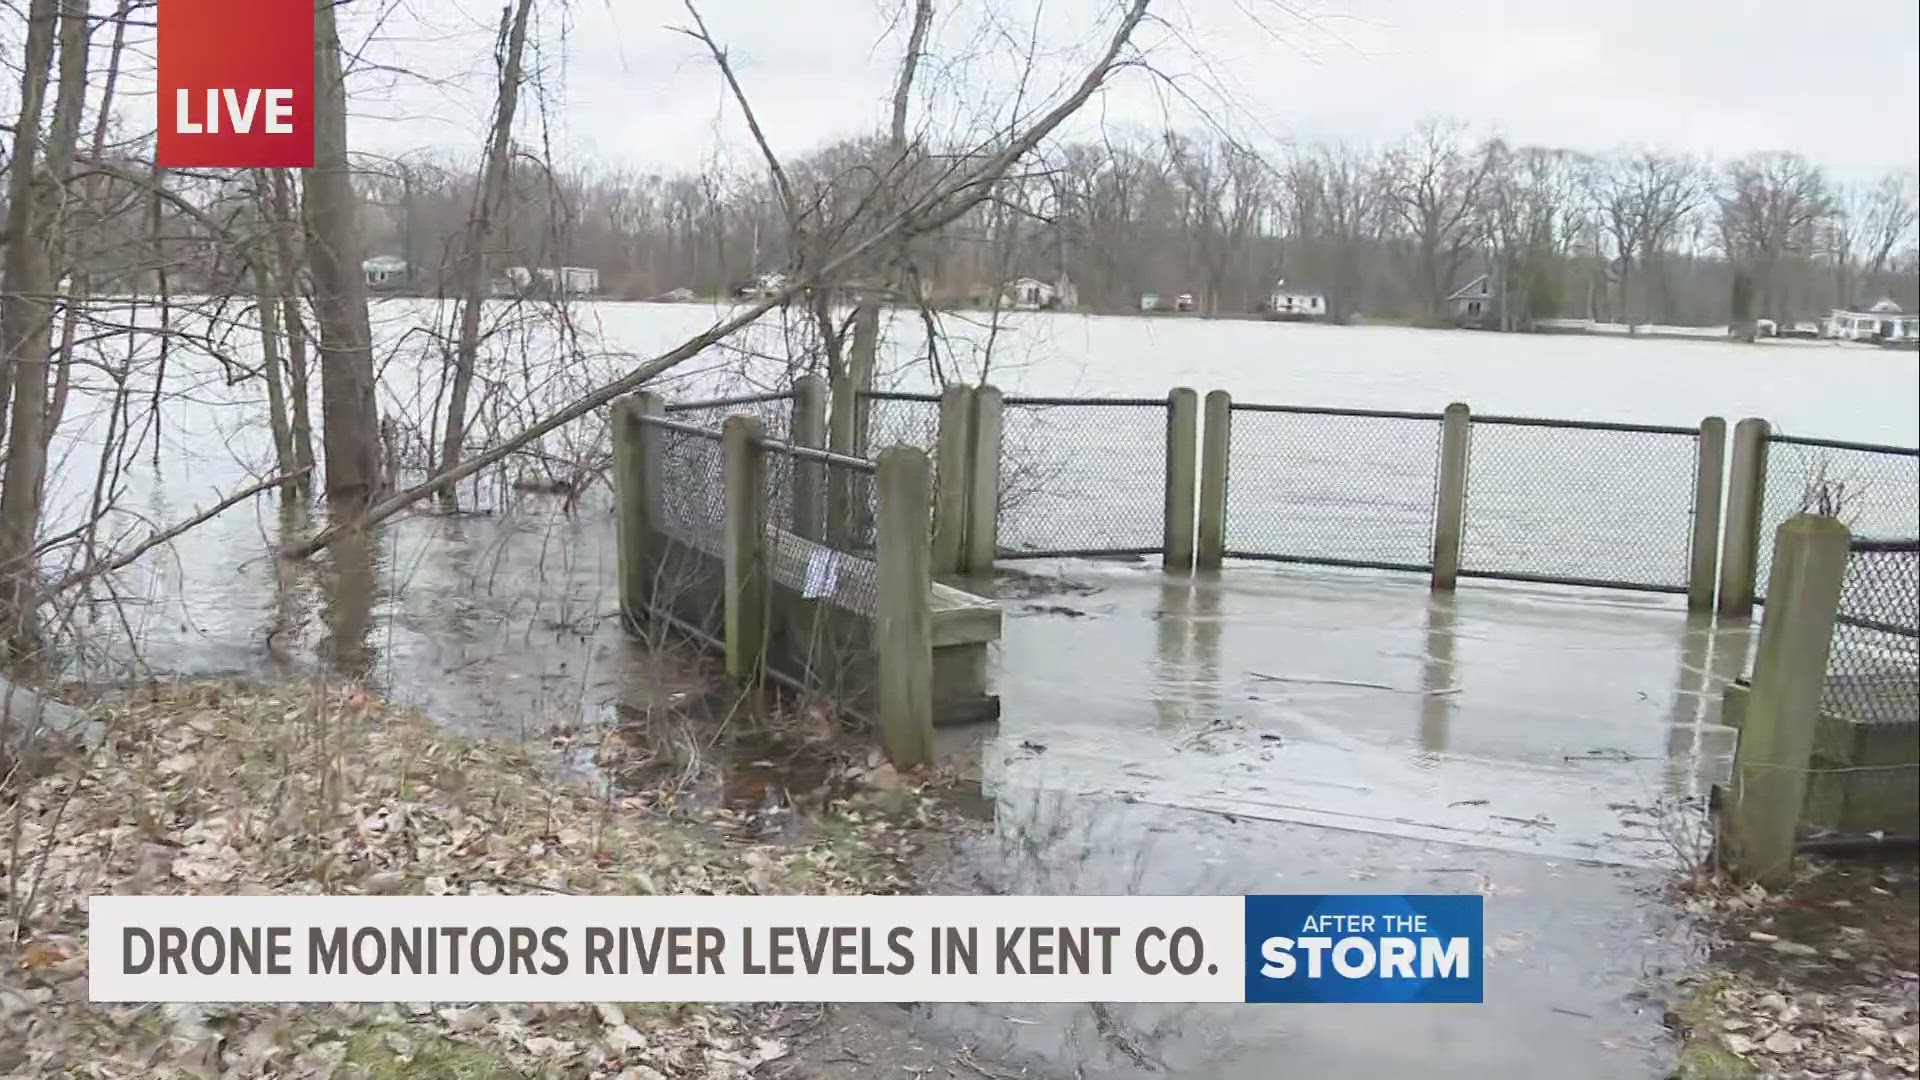 Flooding remains a concern across the area. Rounds of sustained rainfall means runoff and higher water levels on area rivers, including the Grand River.